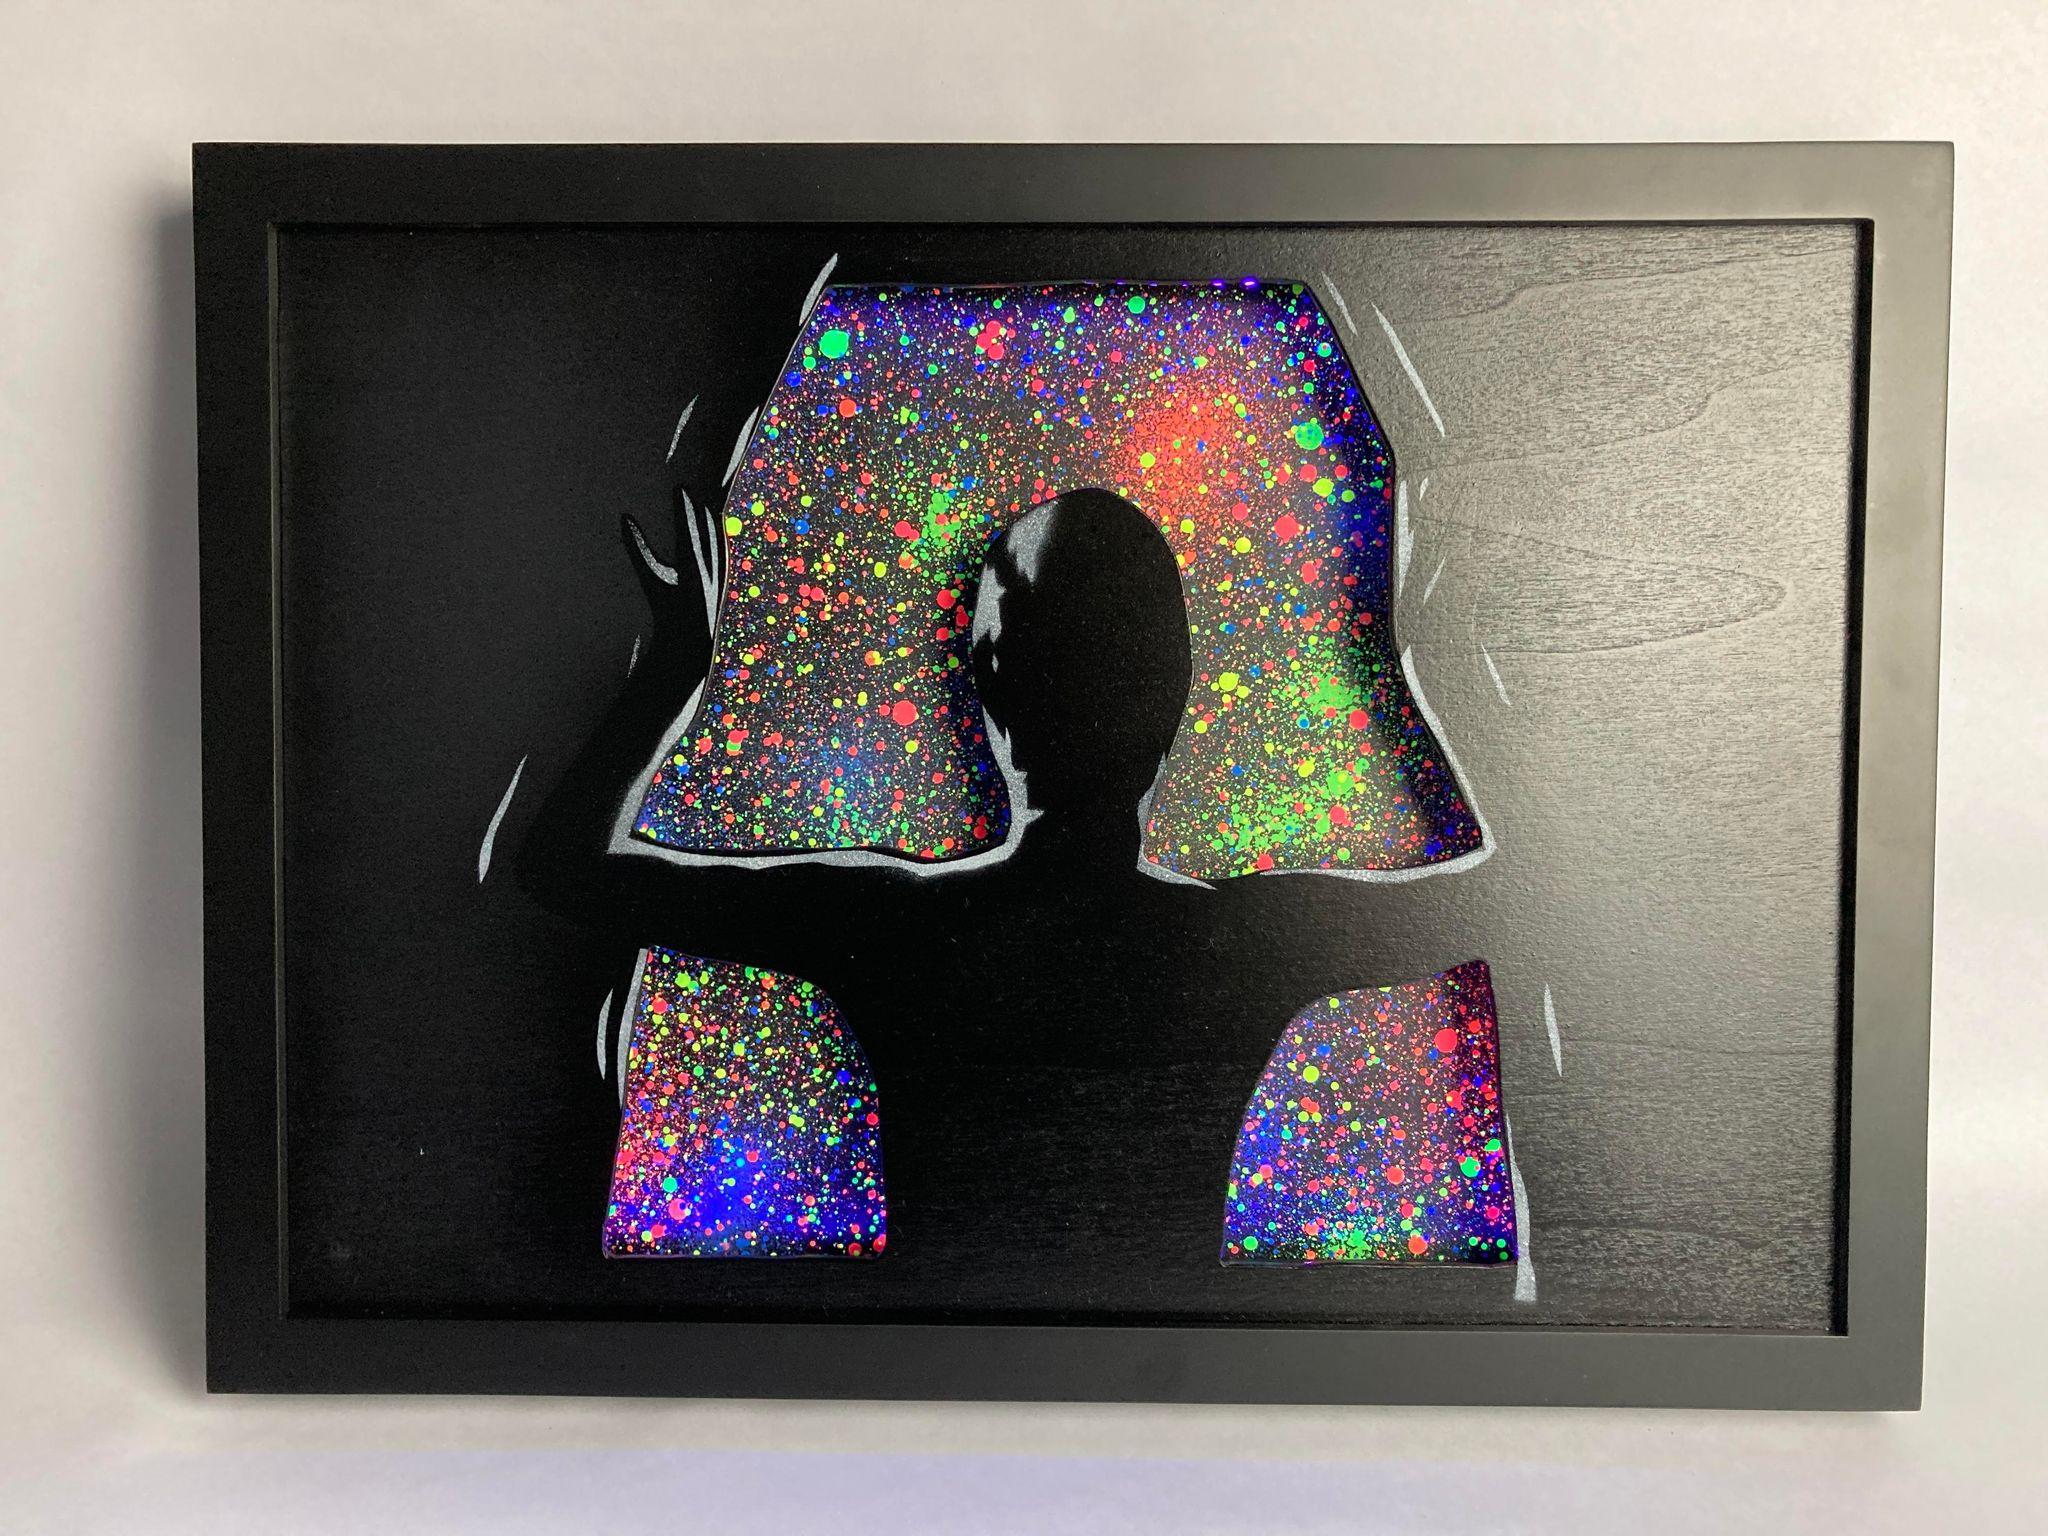 Edition version – cola grey and black background with fluorescent space splatter insert.
Surface – customized light up - wood panel in a frame
Edition size – AP
Size – panel - 16.5x11.7”/ framed 17.7x12.9” approximately 
Year – 2022
Description – 3